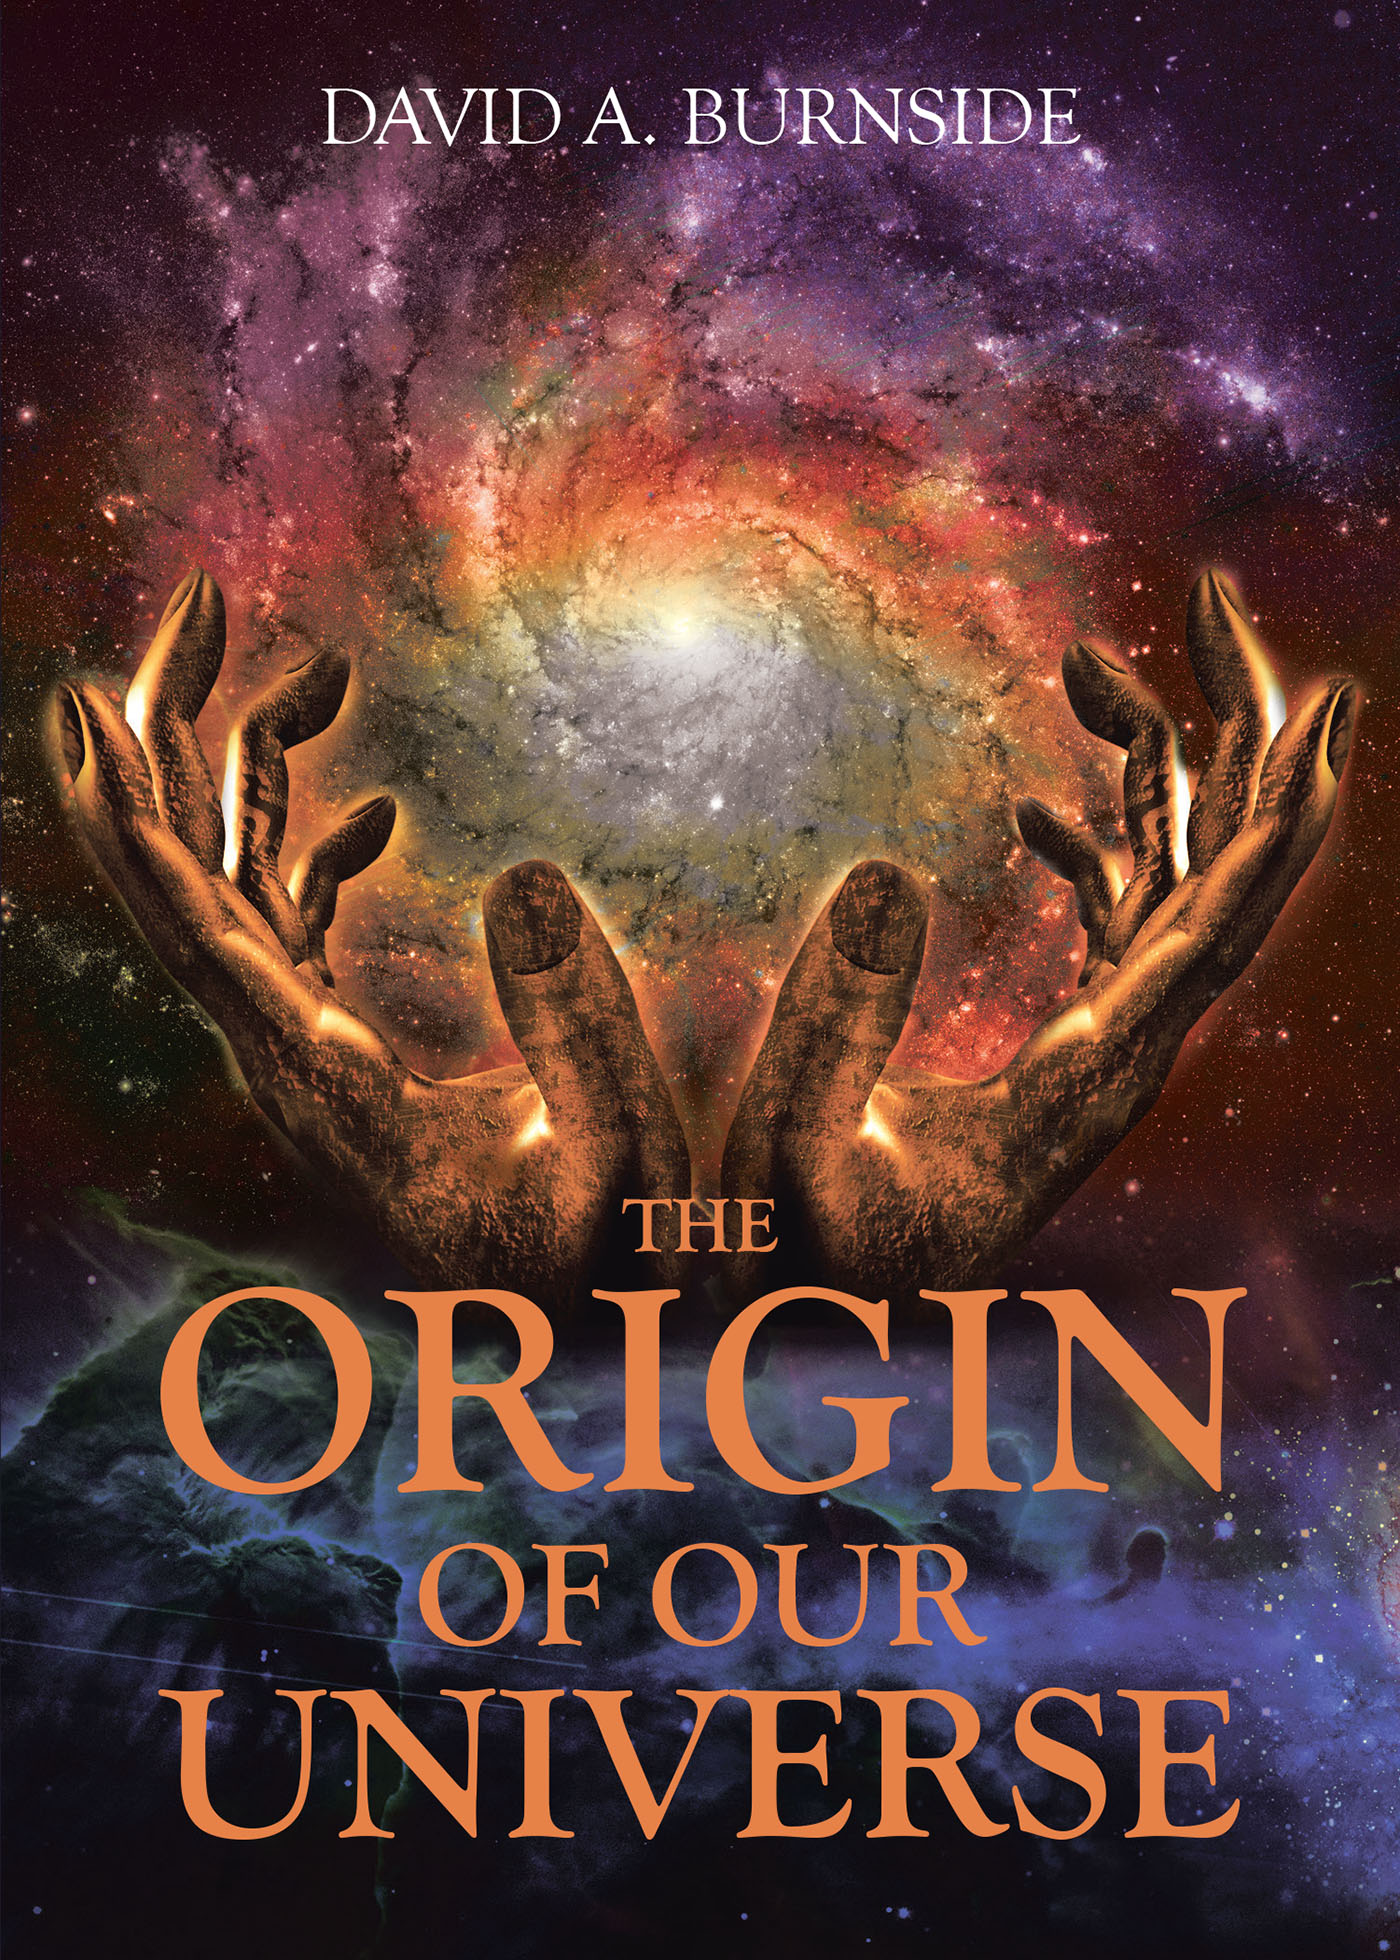 David A. Burnside’s Newly Released “THE ORIGIN OF OUR UNIVERSE” is an Articulate Study of the Beginning of the Known Universe